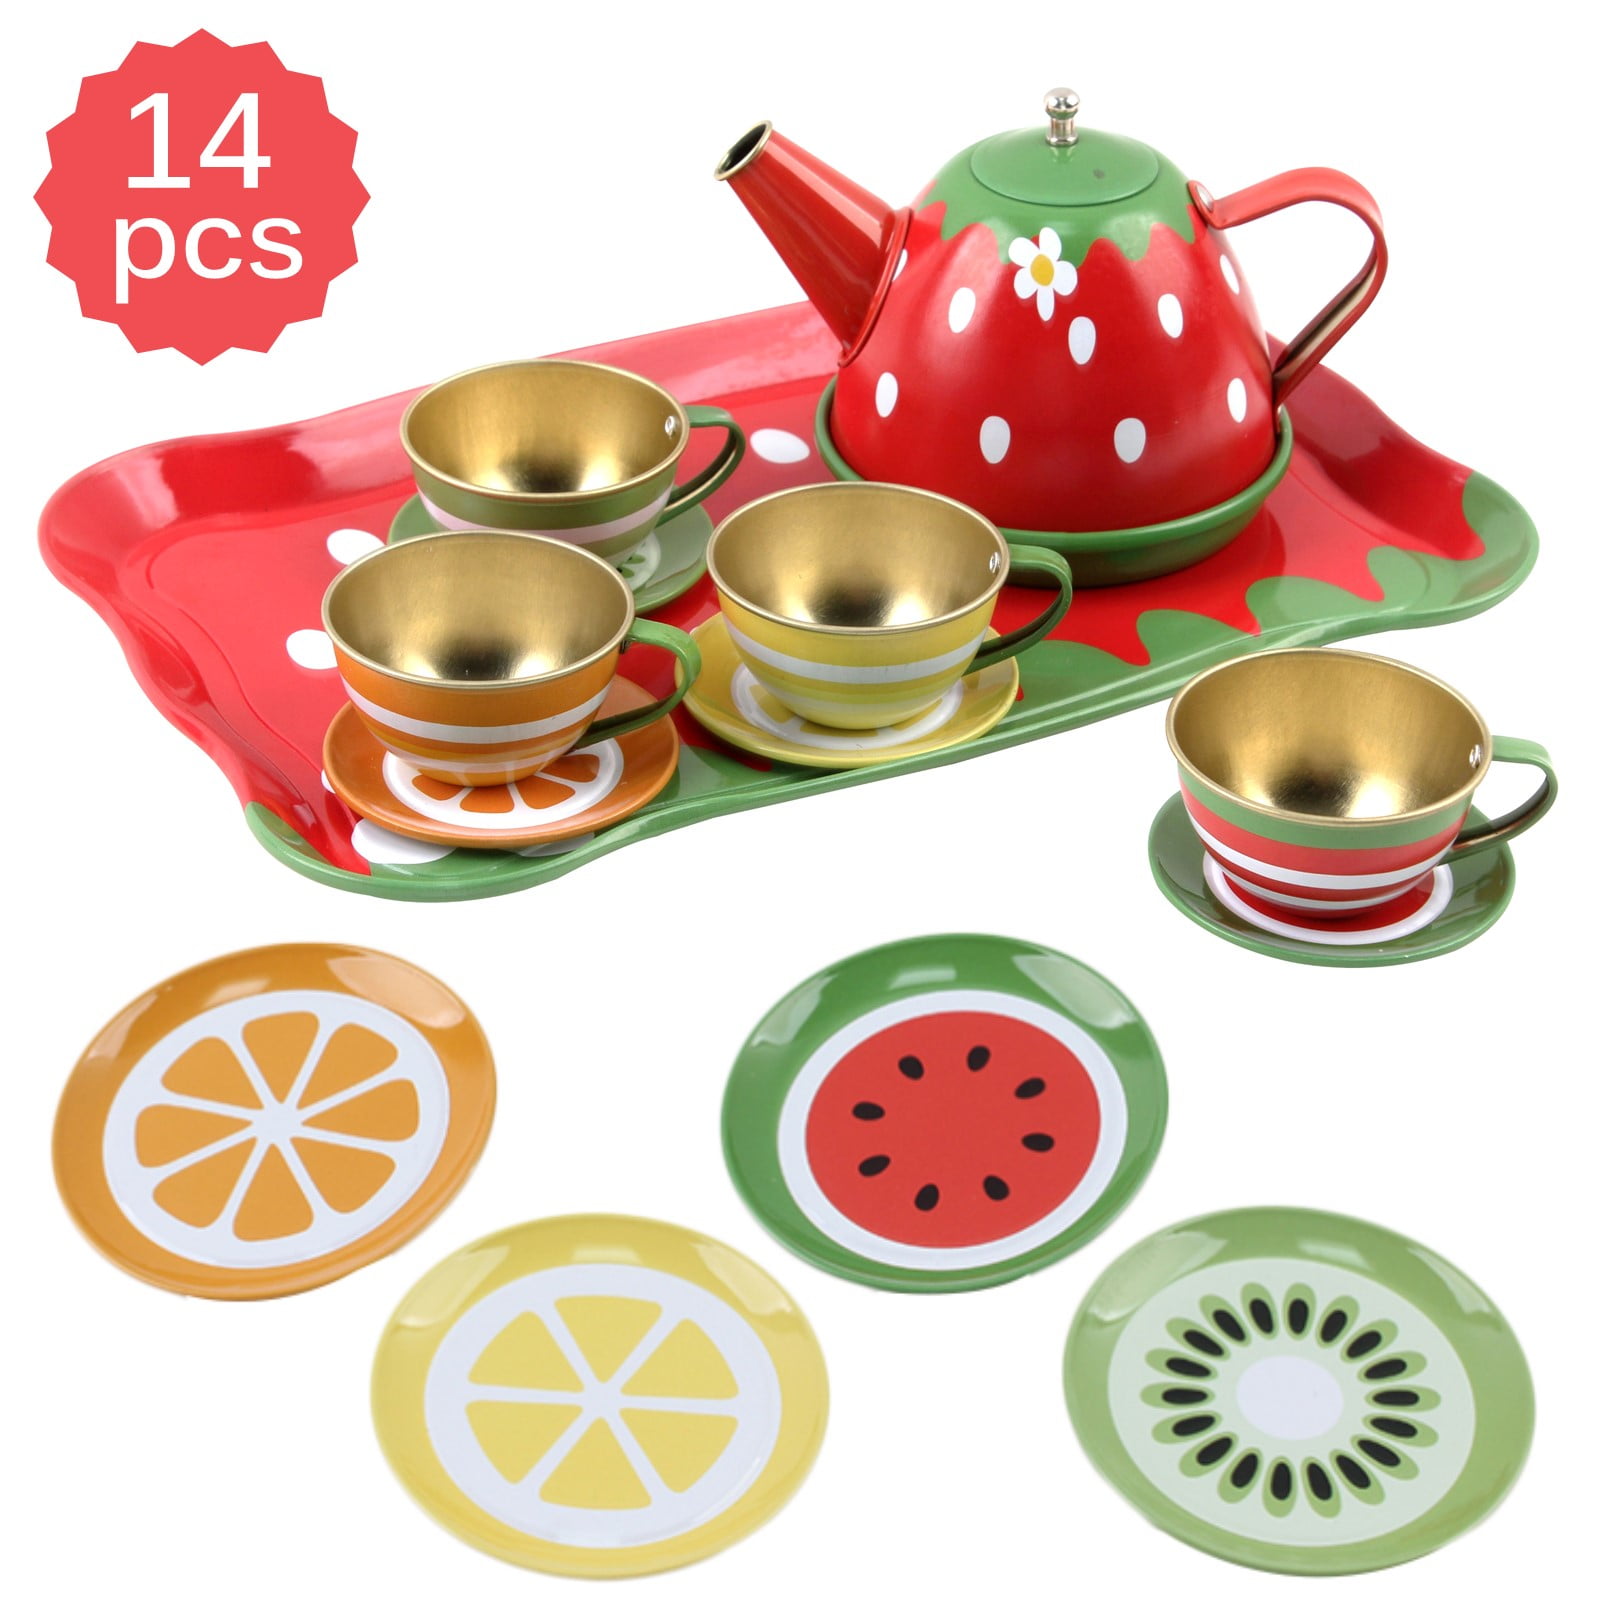 Simulation Food Teapot Tableware Kitchen Toy Kids Pretend Play Educational Toys 